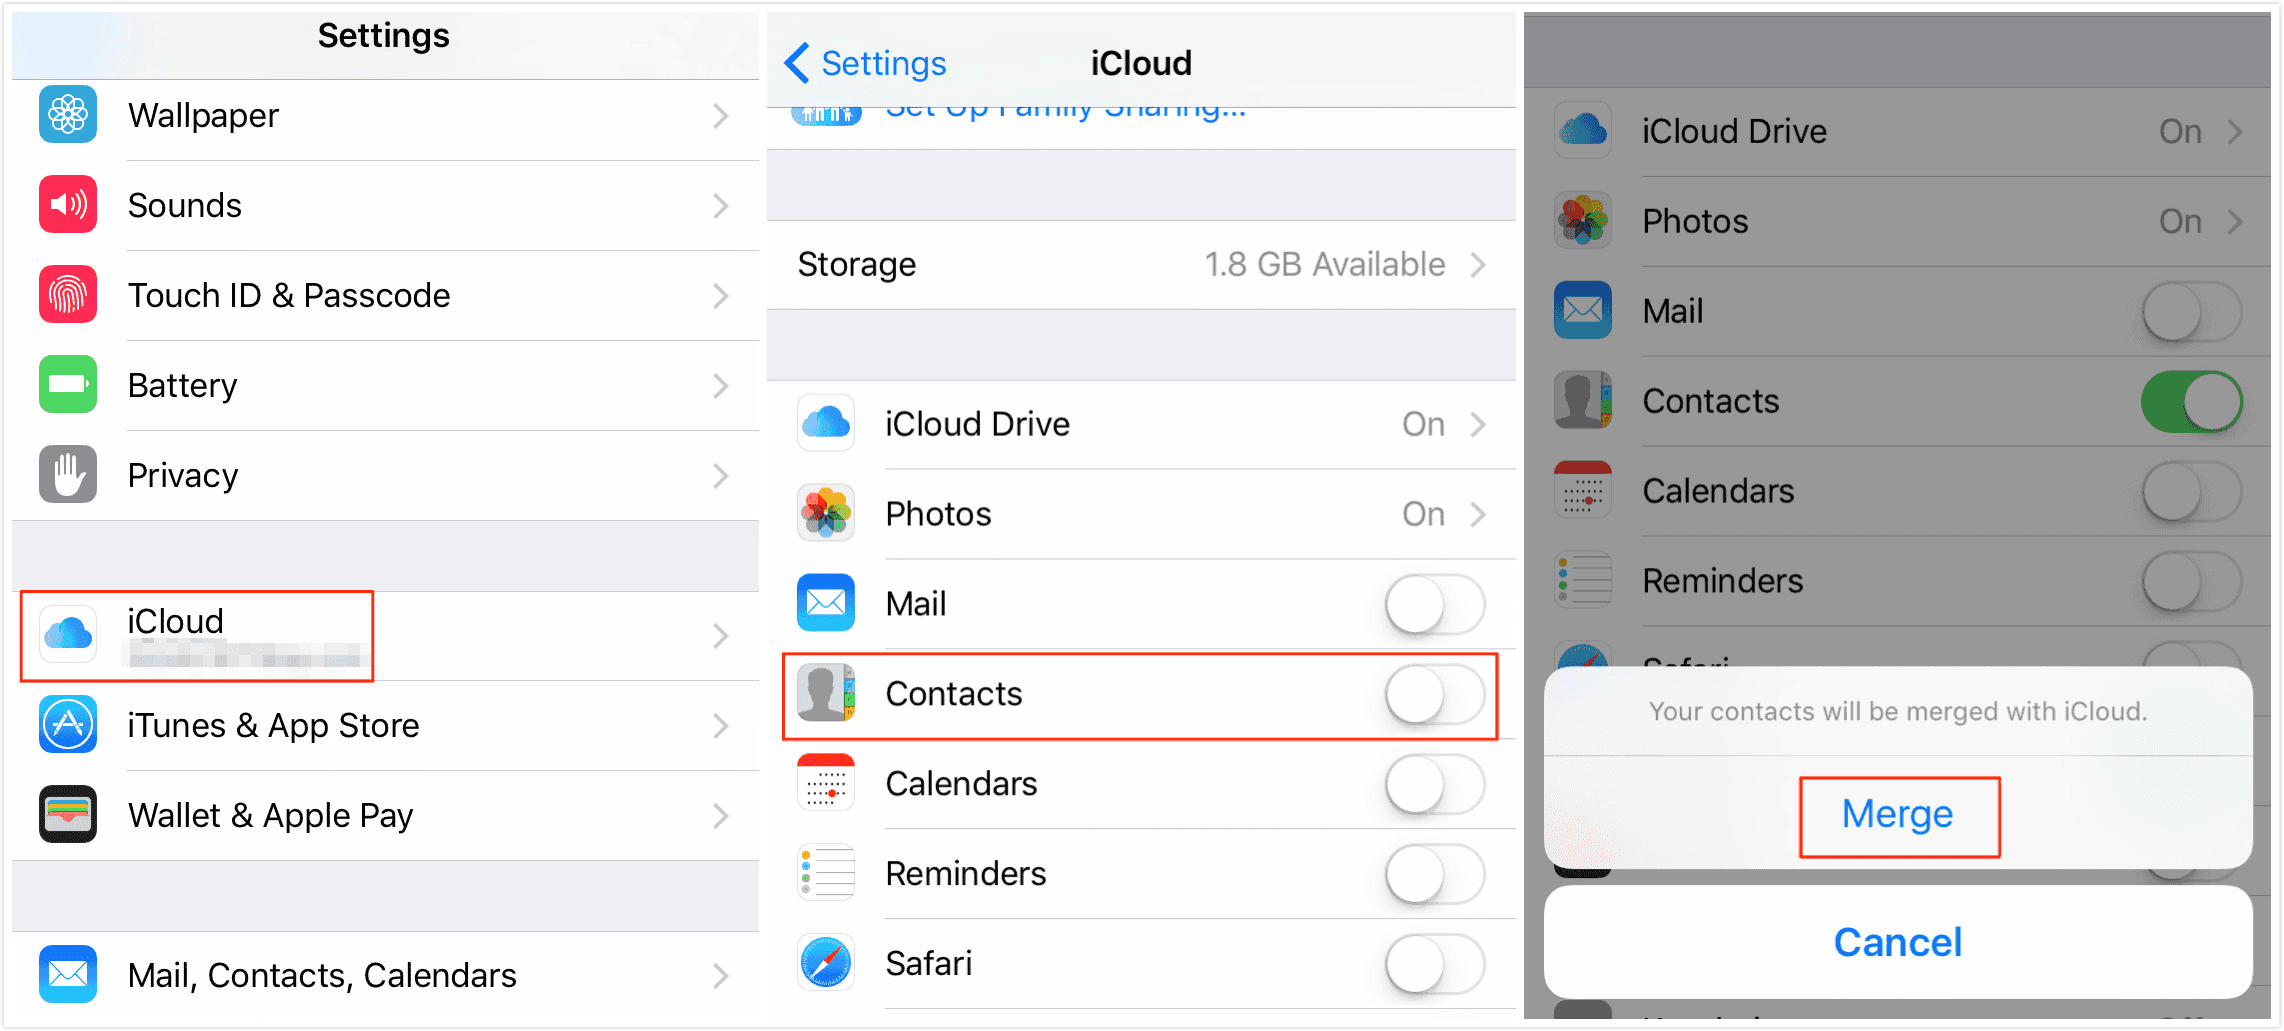 How To Transfer Contacts From iPhone To iPhone?